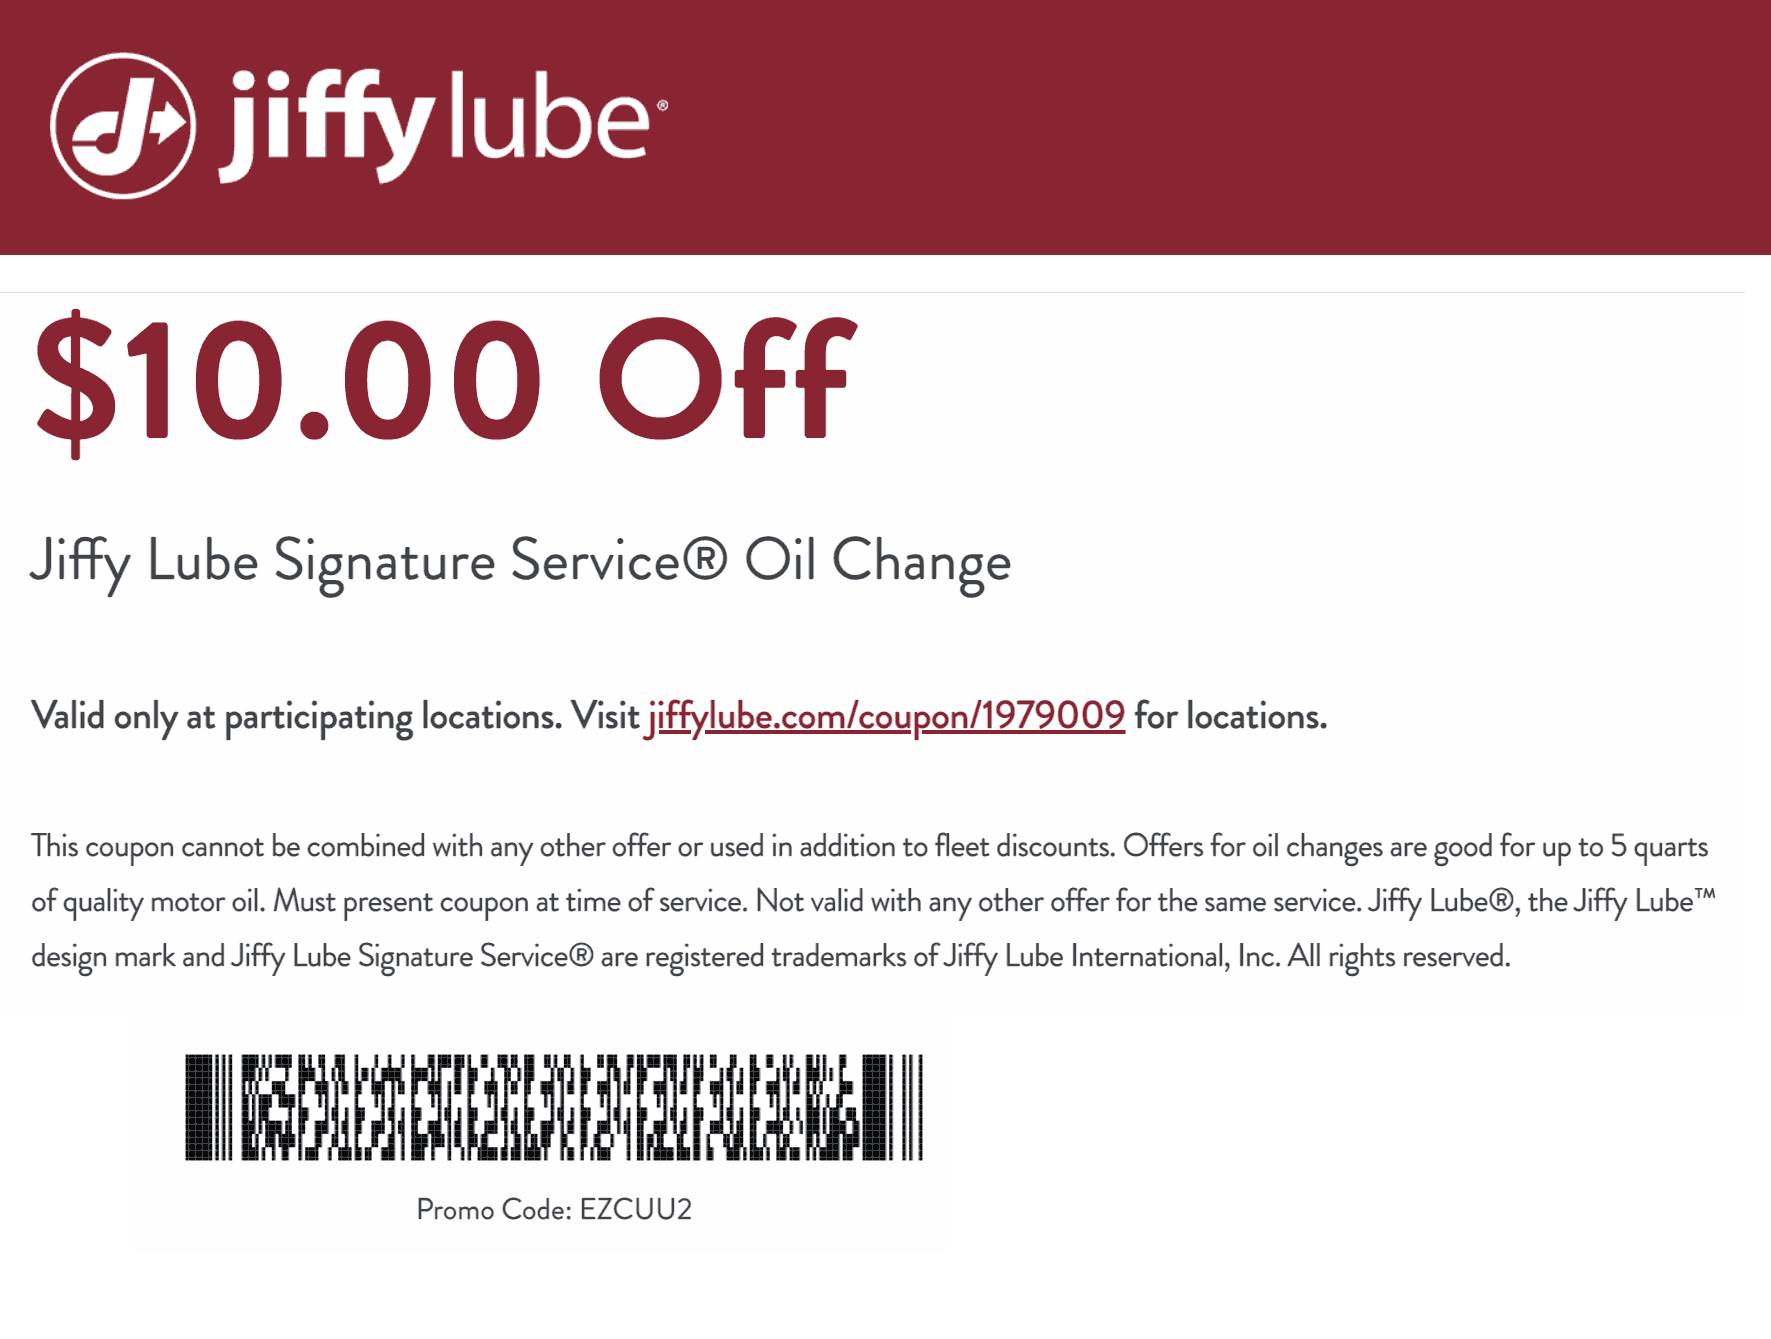 Jiffy Lube stores Coupon  $10 off an oil change at Jiffy Lube #jiffylube 